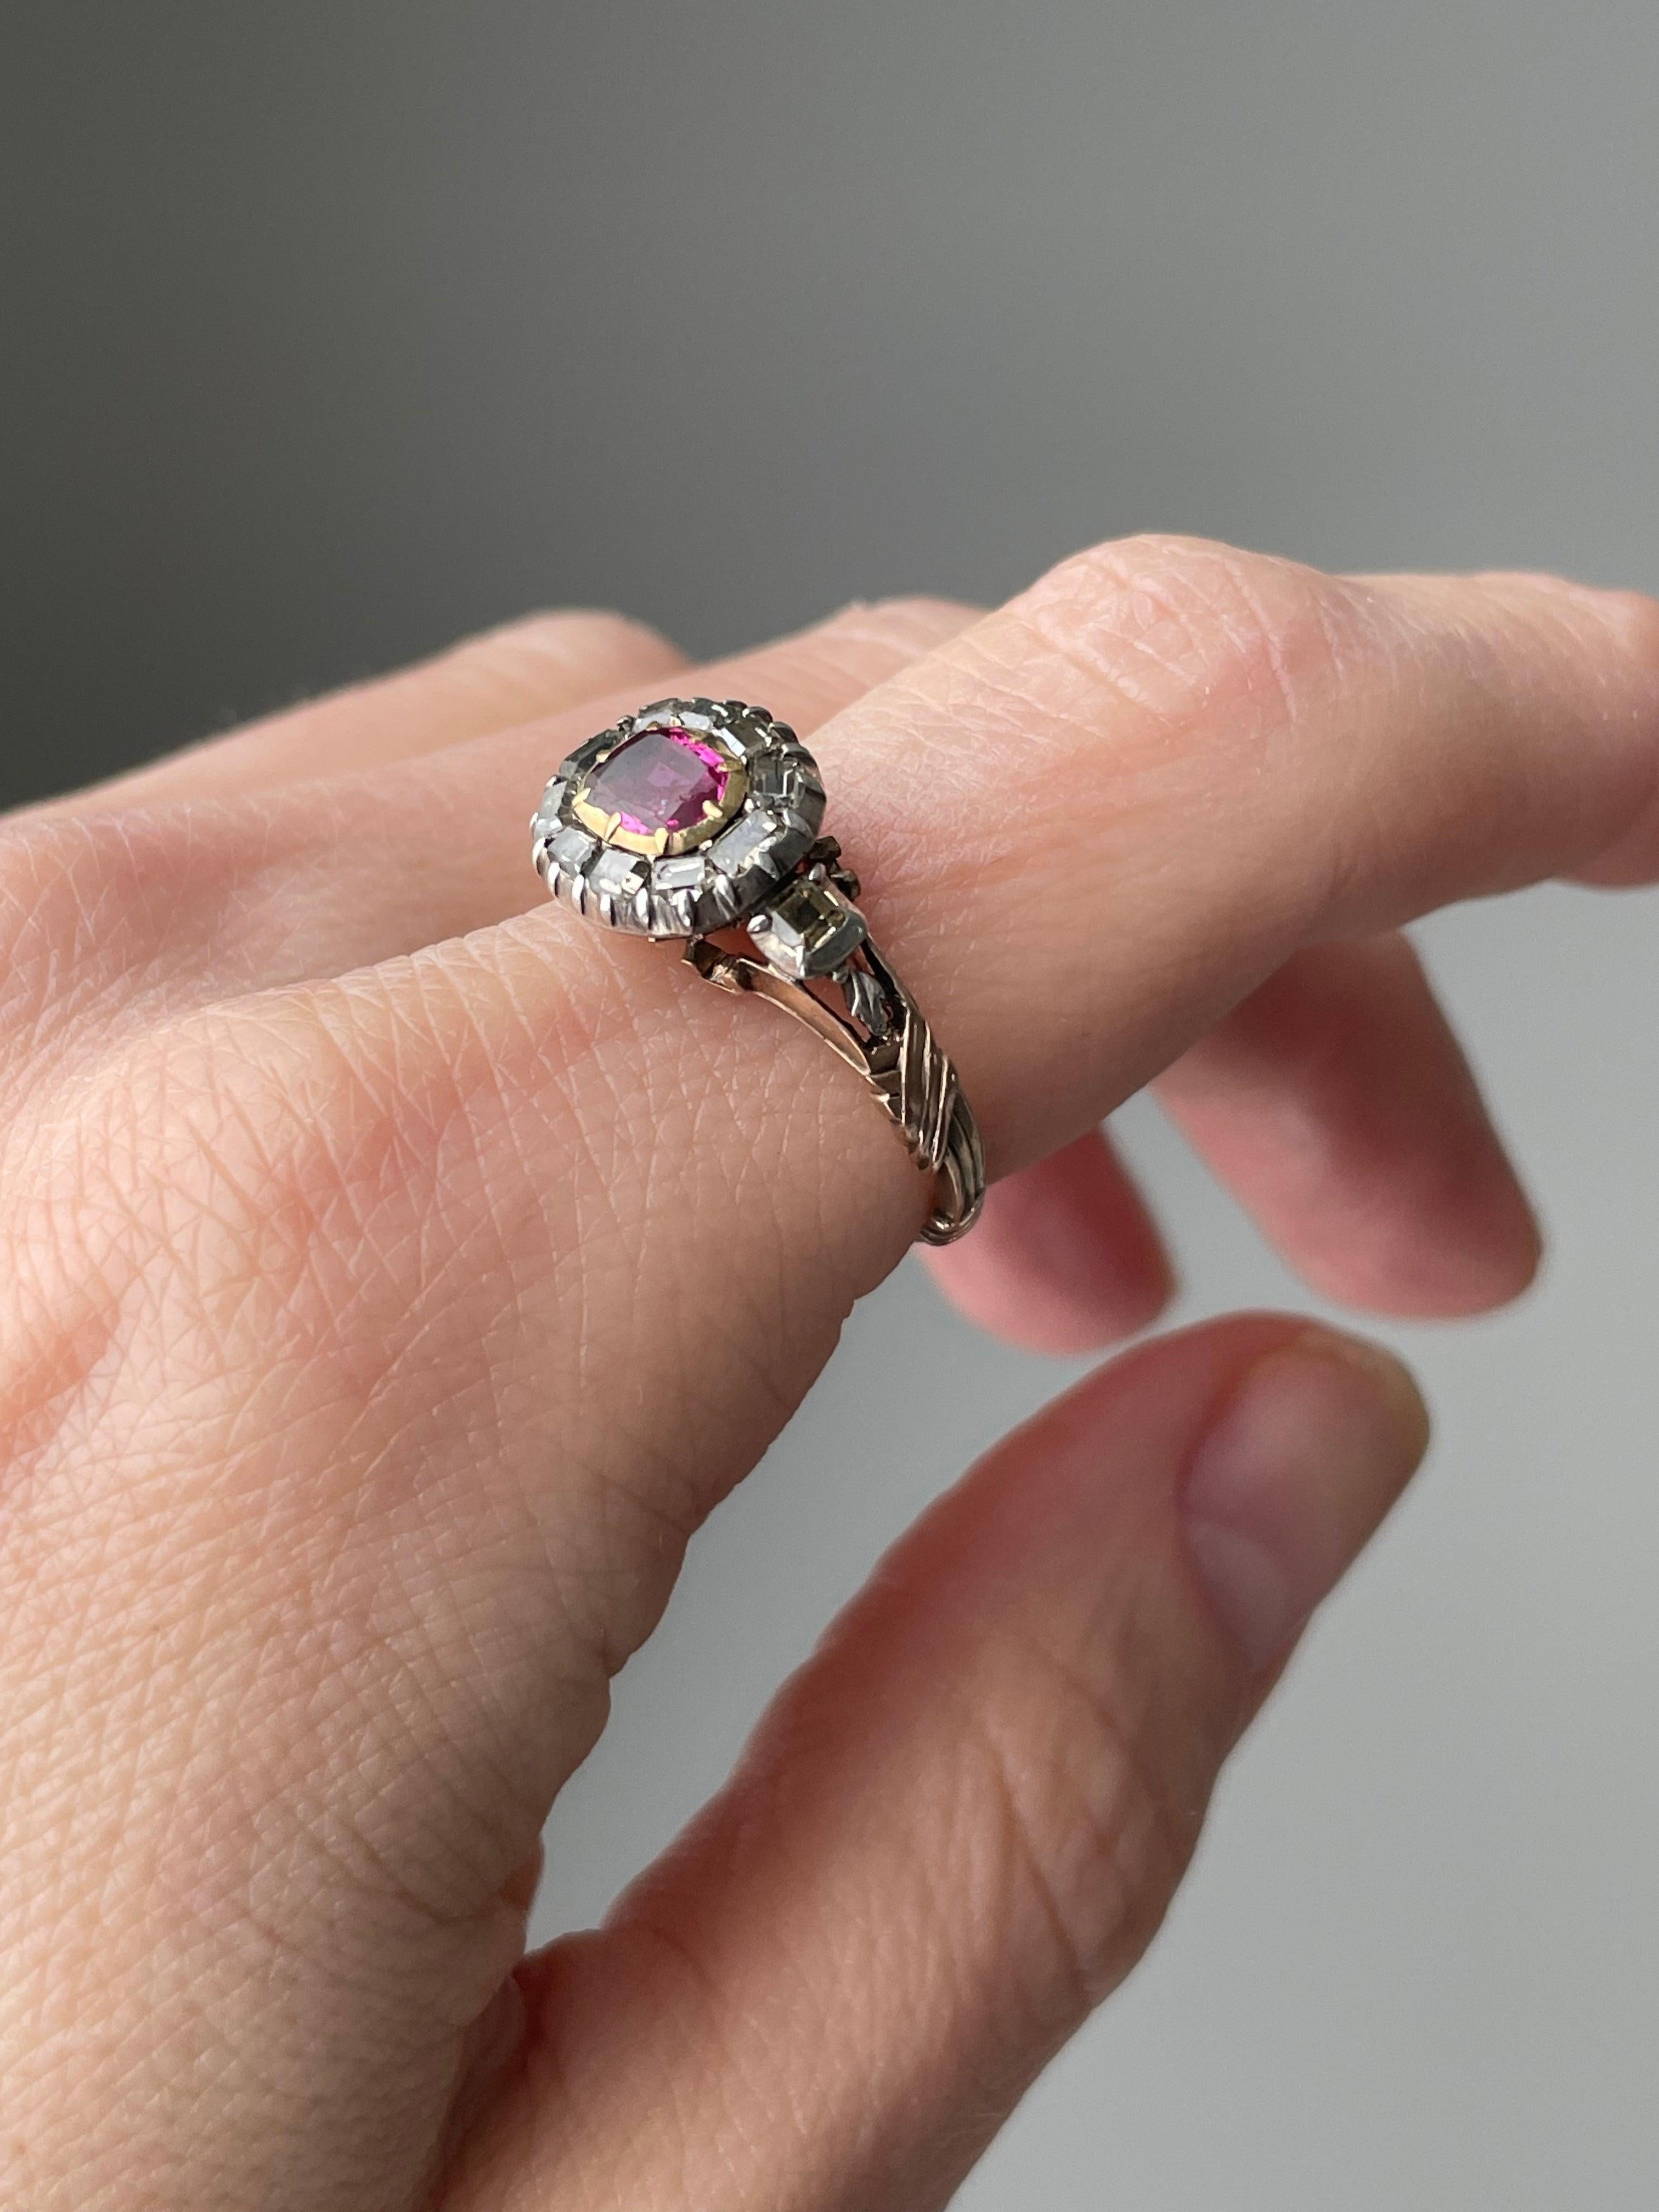 This exceptionally lovely Georgian ring centers on a vibrant raspberry red ruby framed in a halo of mirror like table-cut diamonds. The shoulders are beautifully decorated with stylized cornucopia, each sprouting a tiny diamond rosette, symbolic of